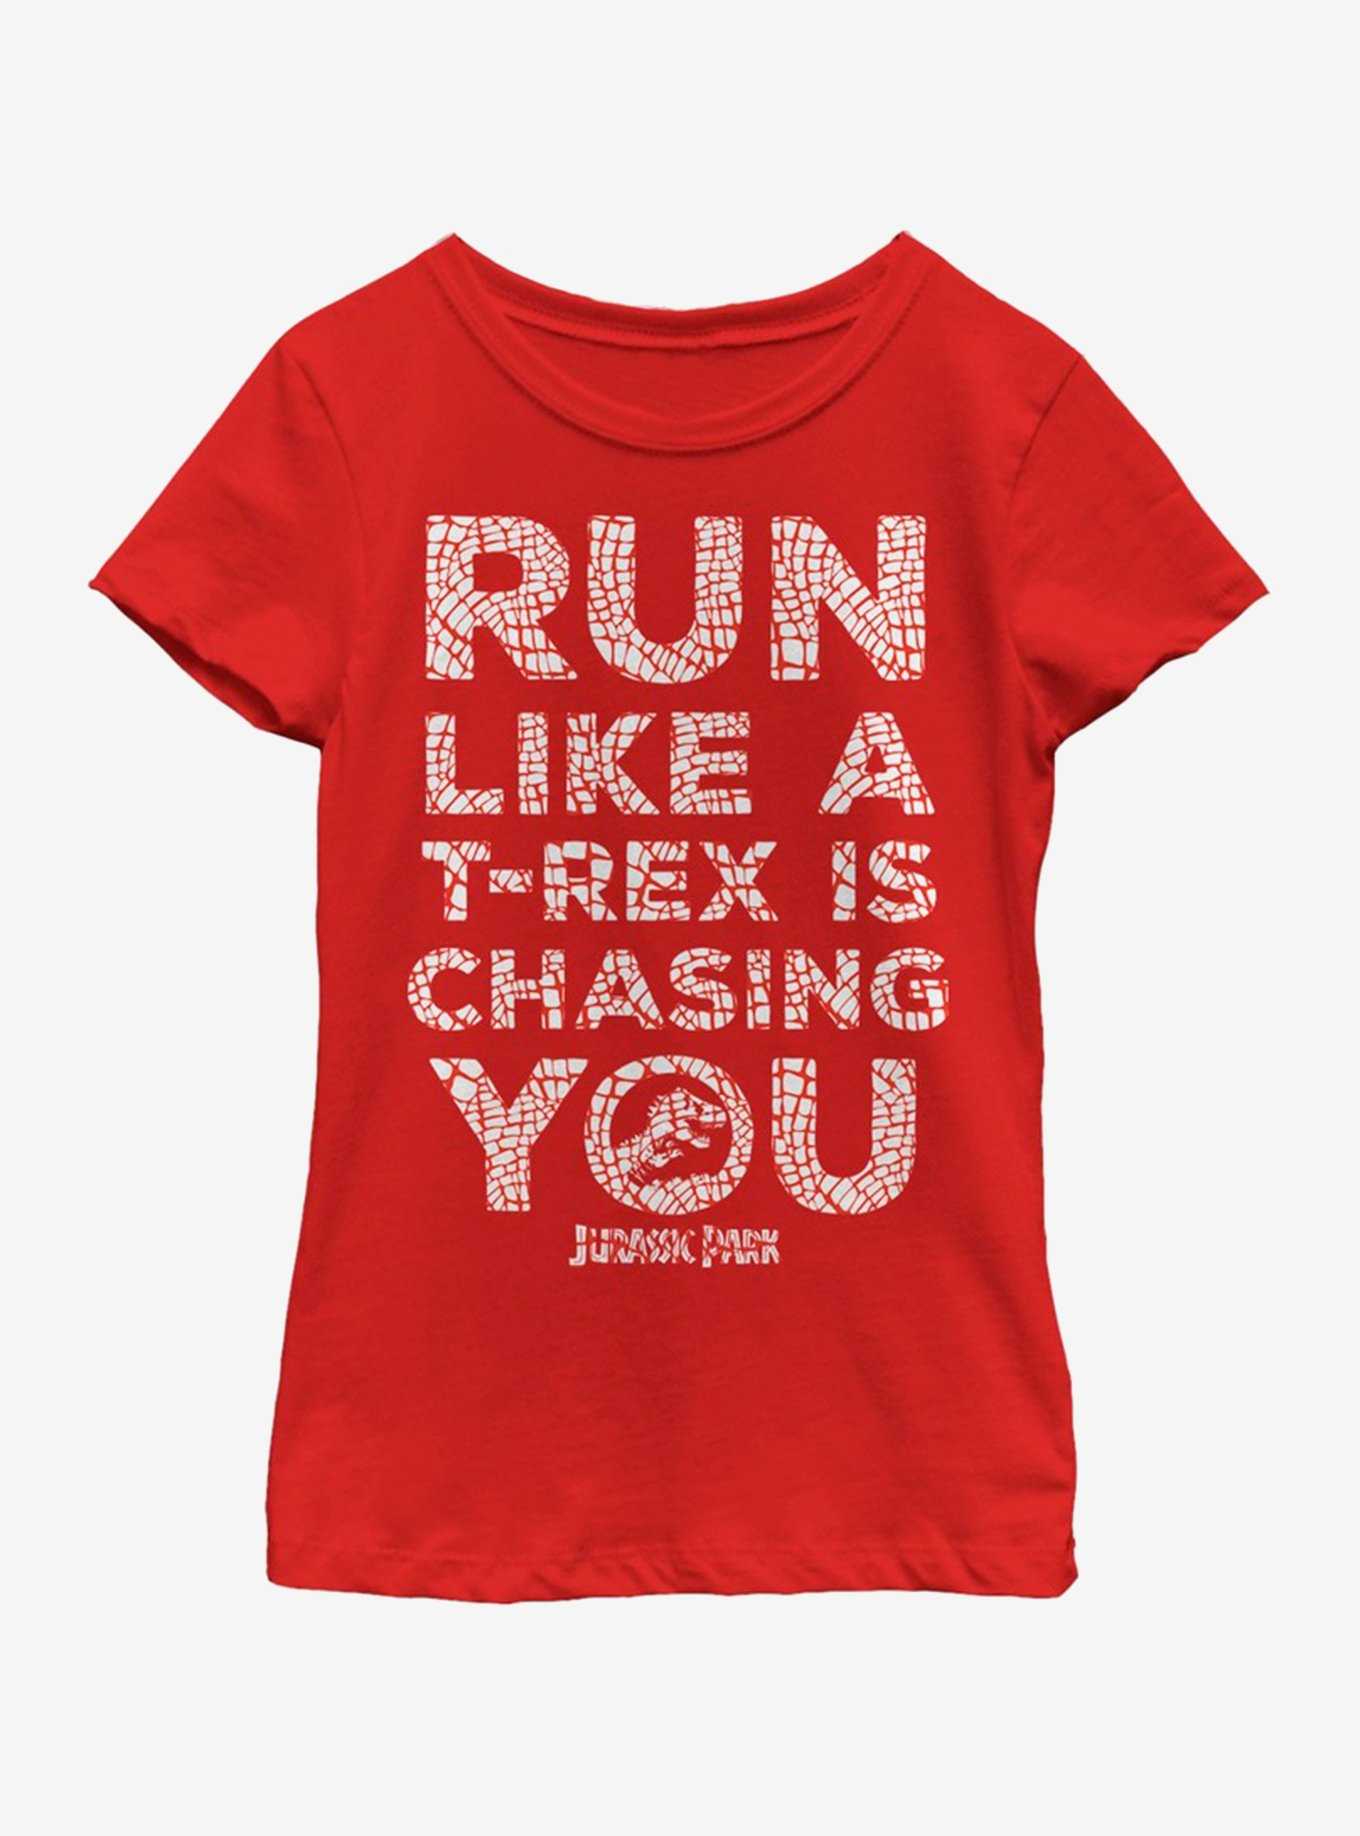 Jurassic Park T-Rex Chase Solid Youth Girls T-Shirt, , hi-res